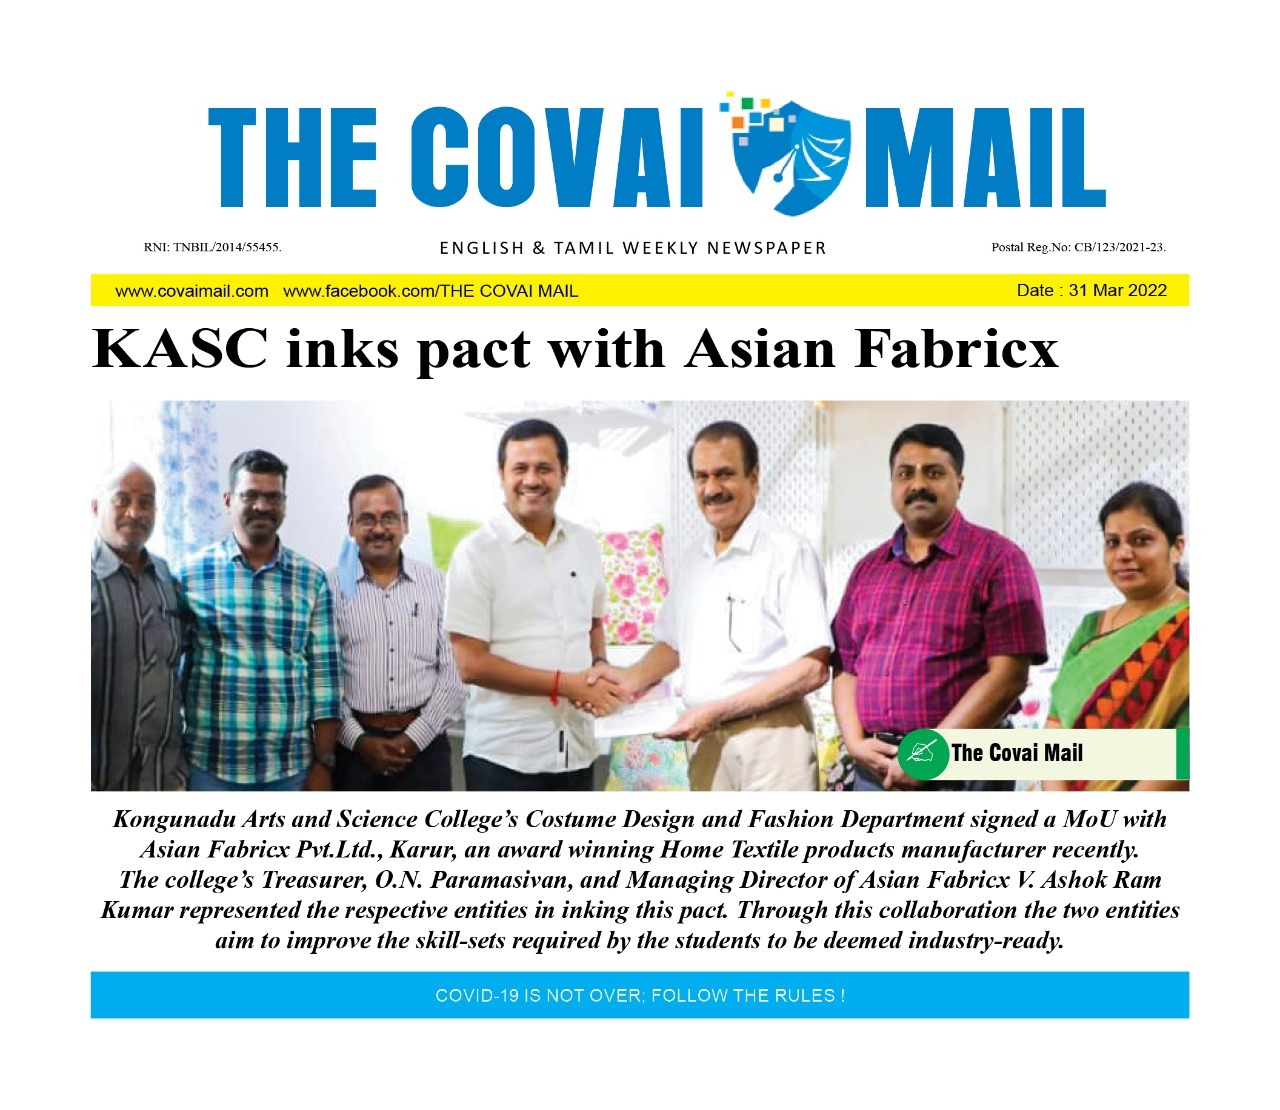 KASC MoU with Asian Fabricx 